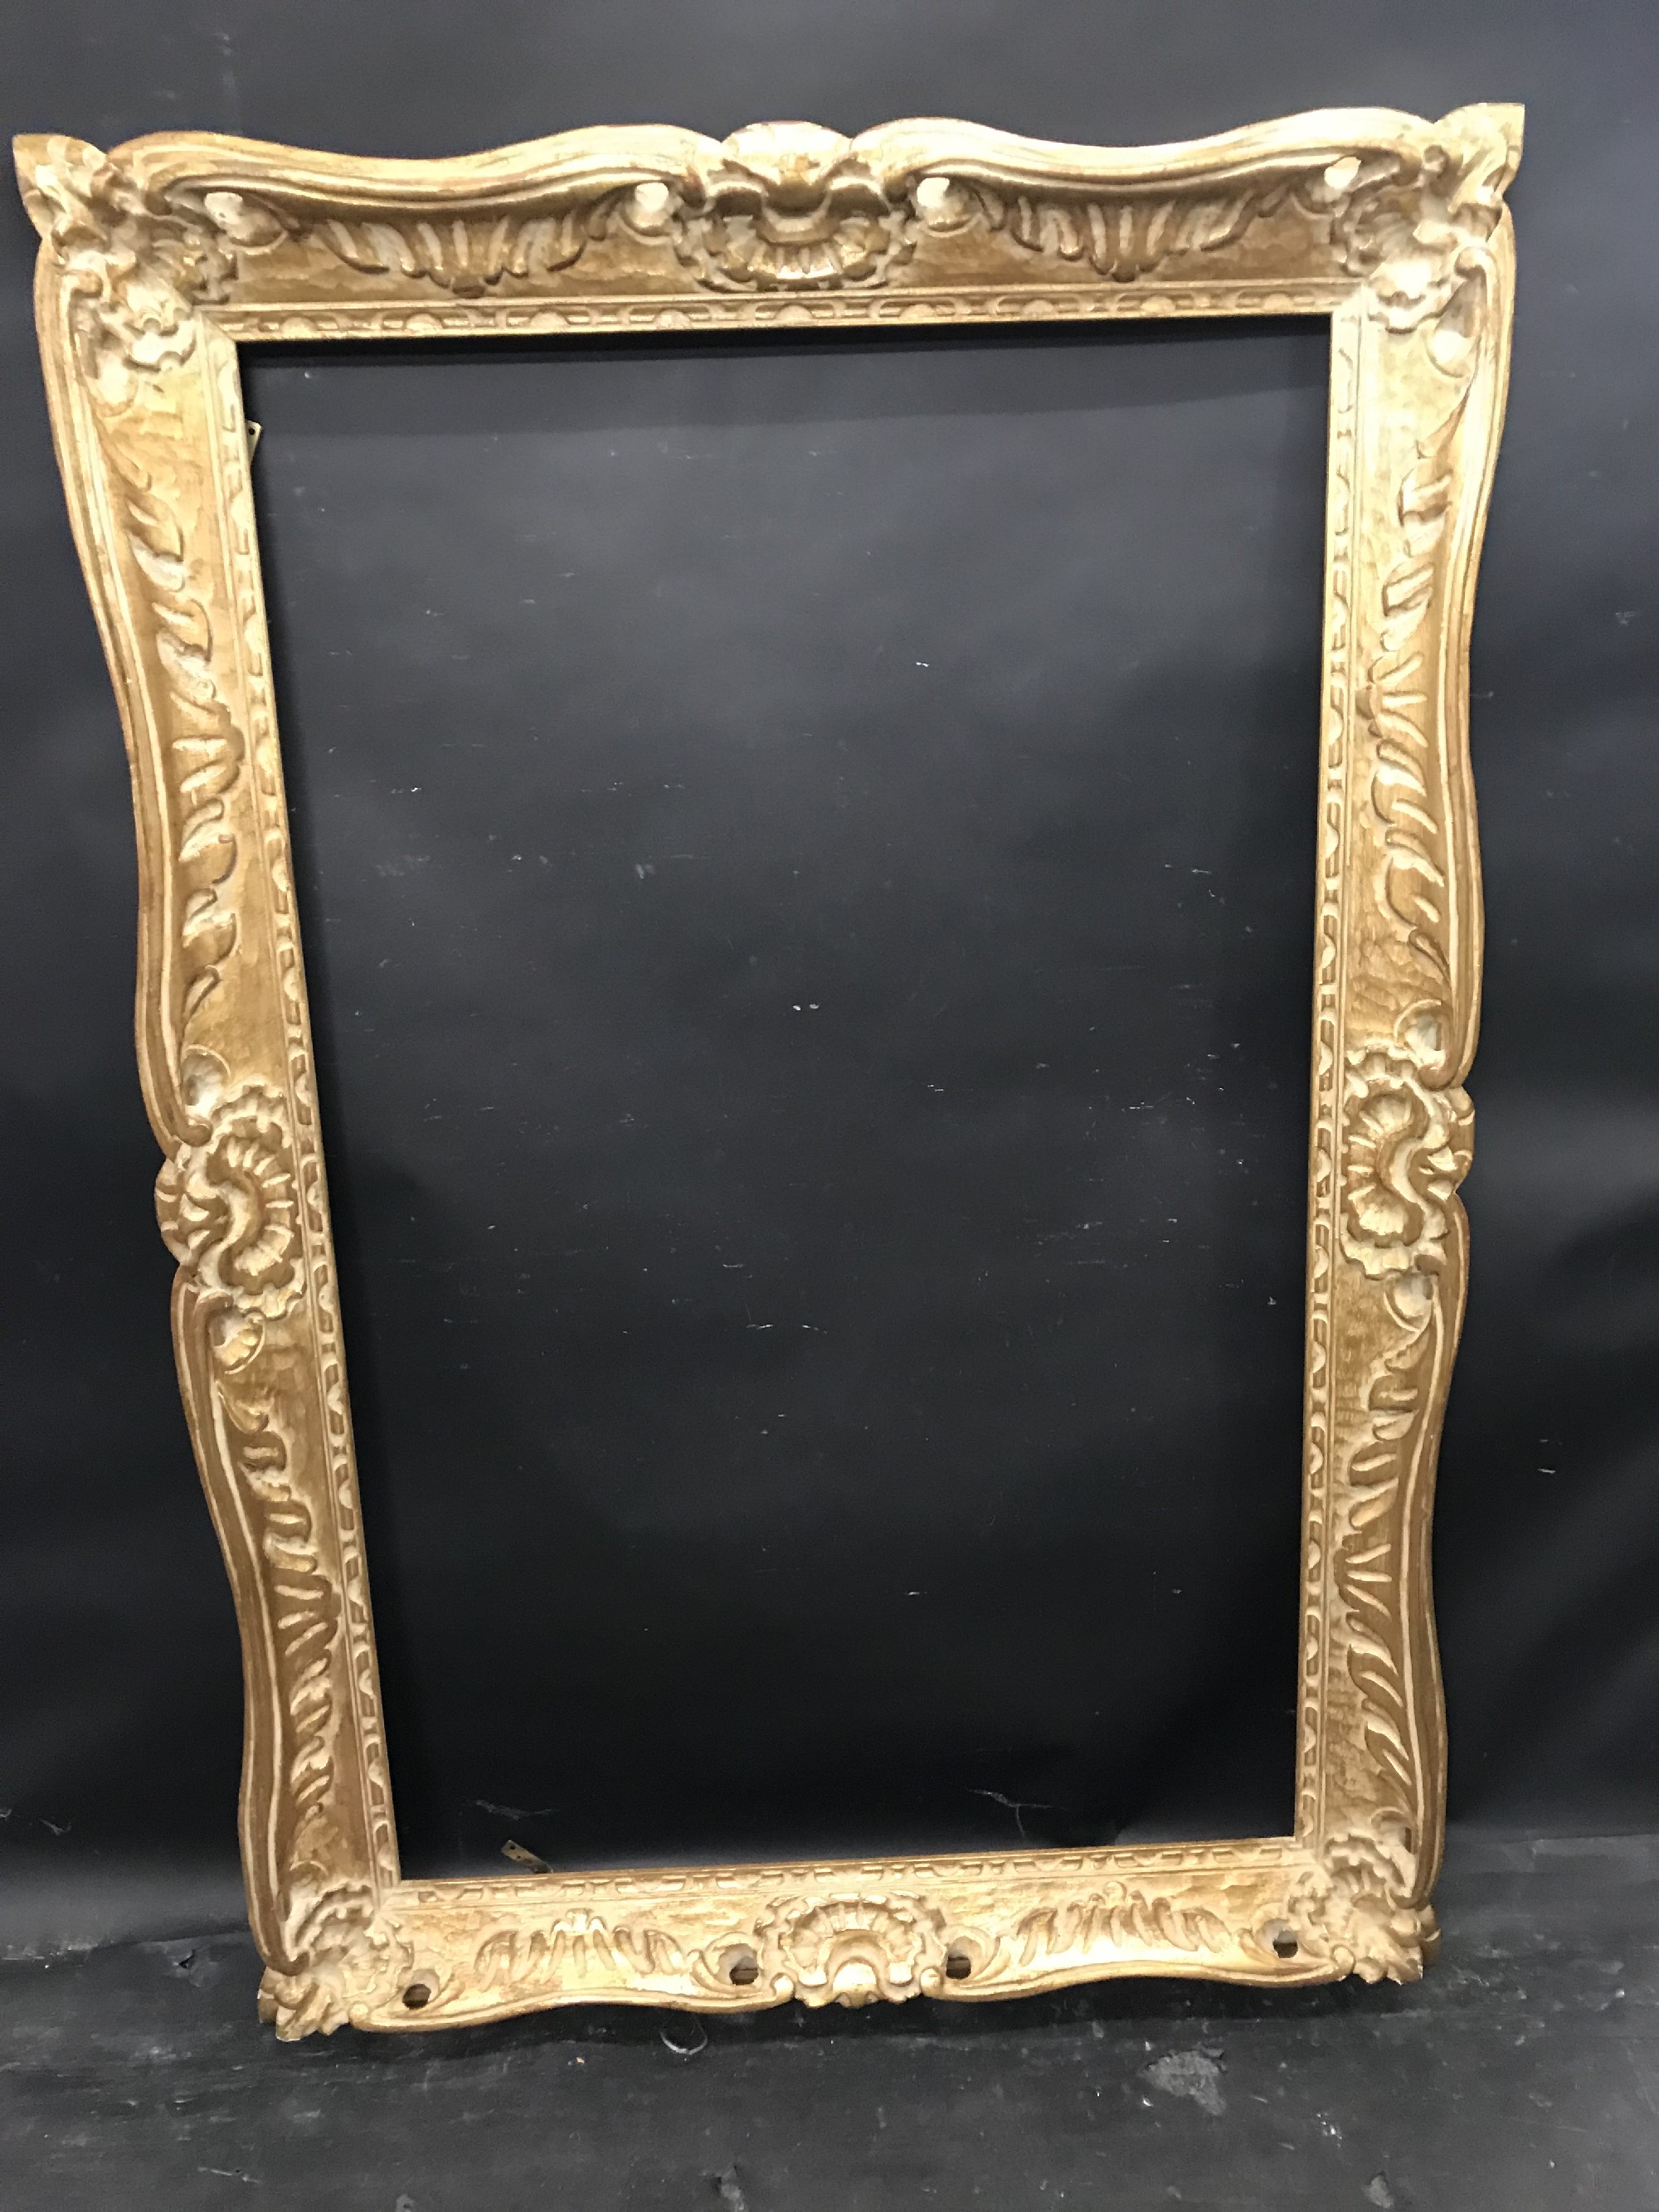 20th Century French School. A Carved Giltwood Frame, 45.5" x 28.5". - Image 2 of 3